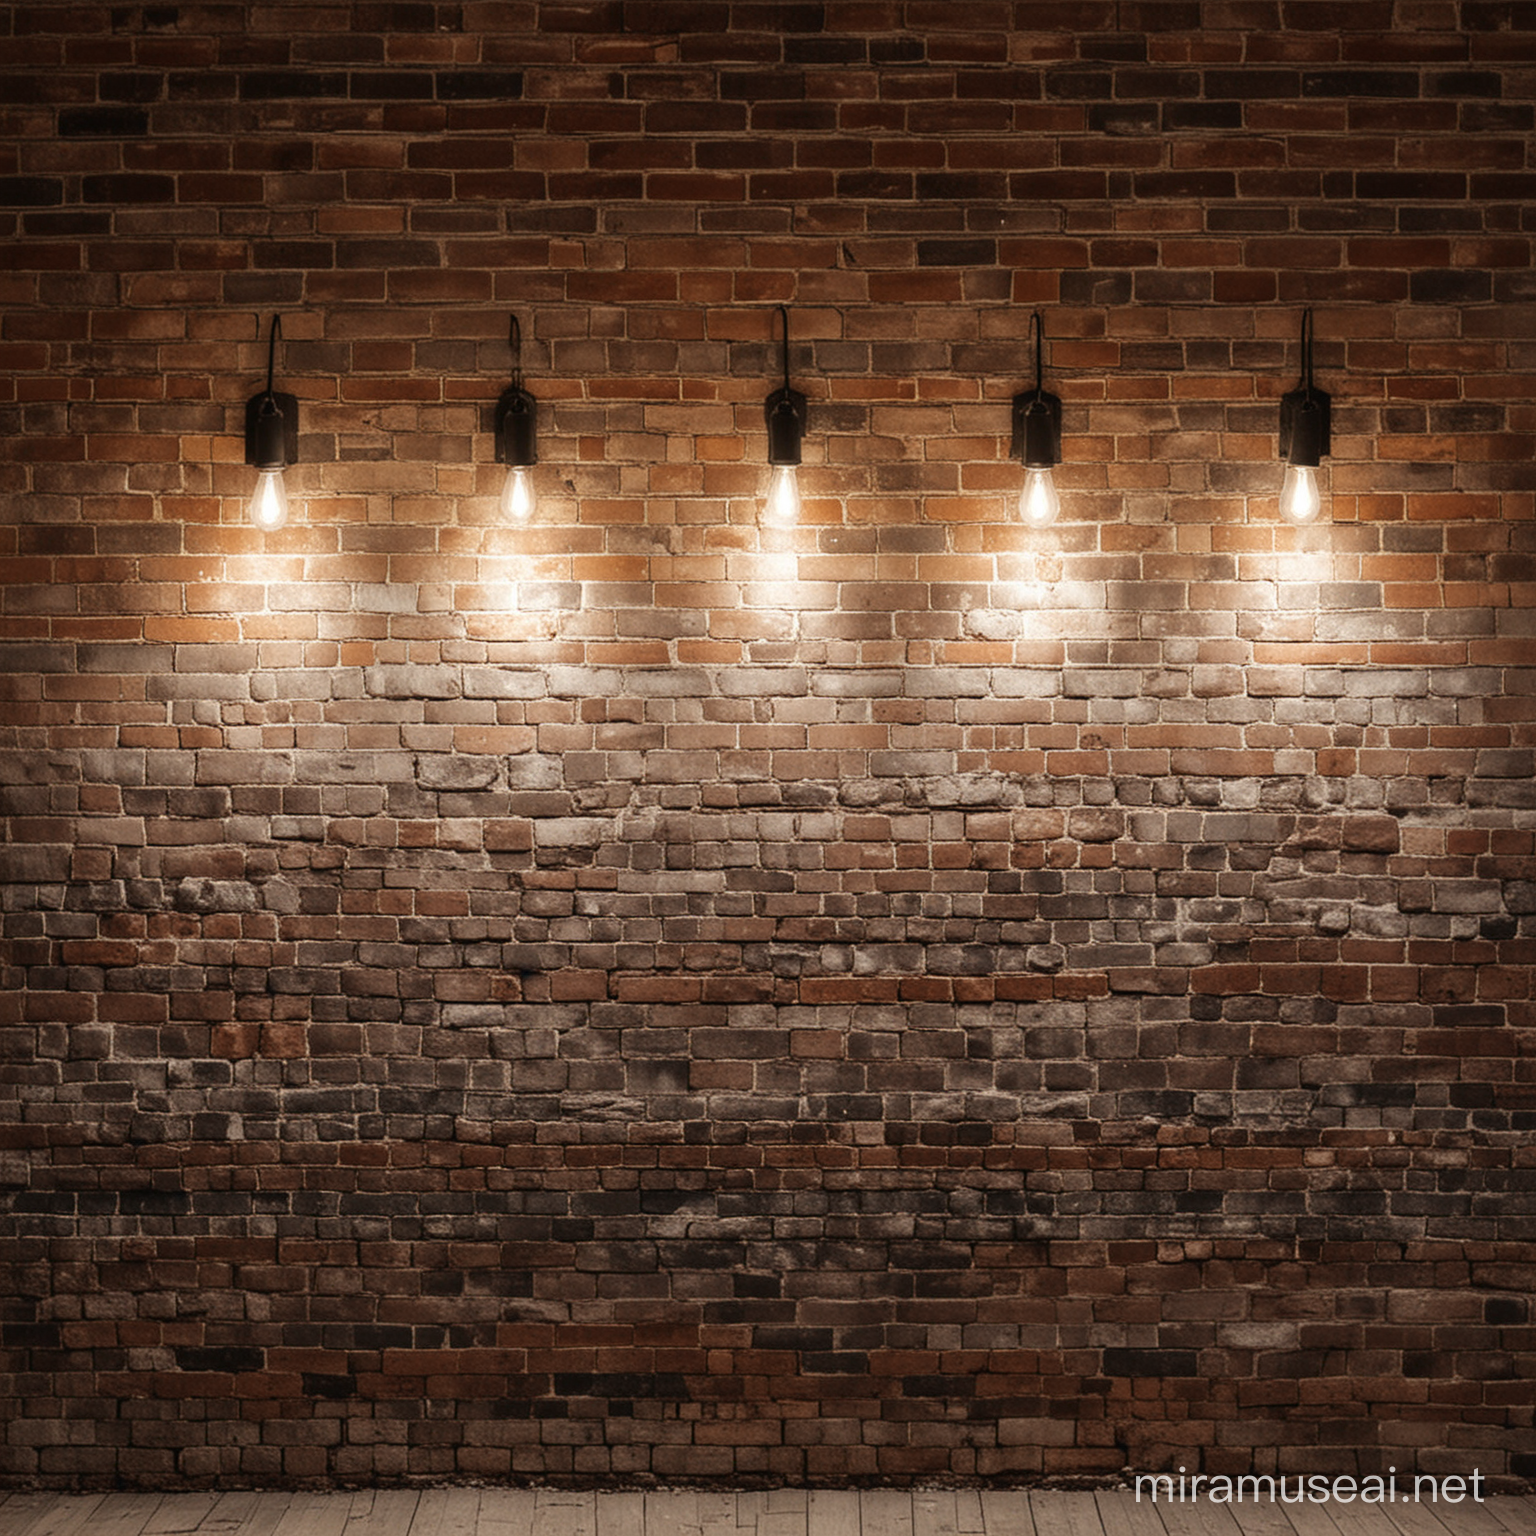 Vintage Brick Wall Illuminated by Four Lights